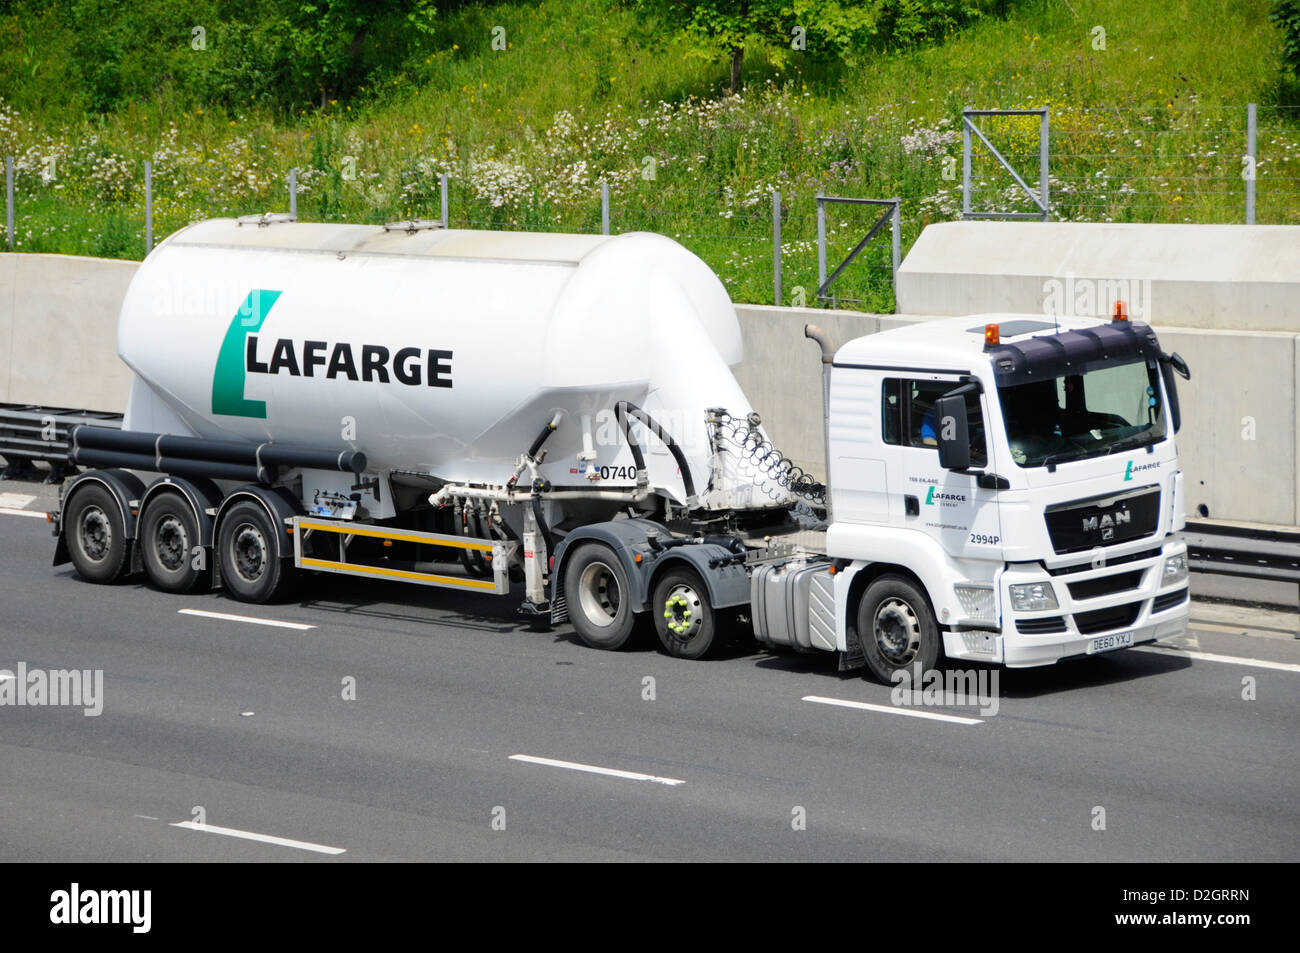 LaFarge bulk cement tanker trailer and lorry on M25 motorway Stock